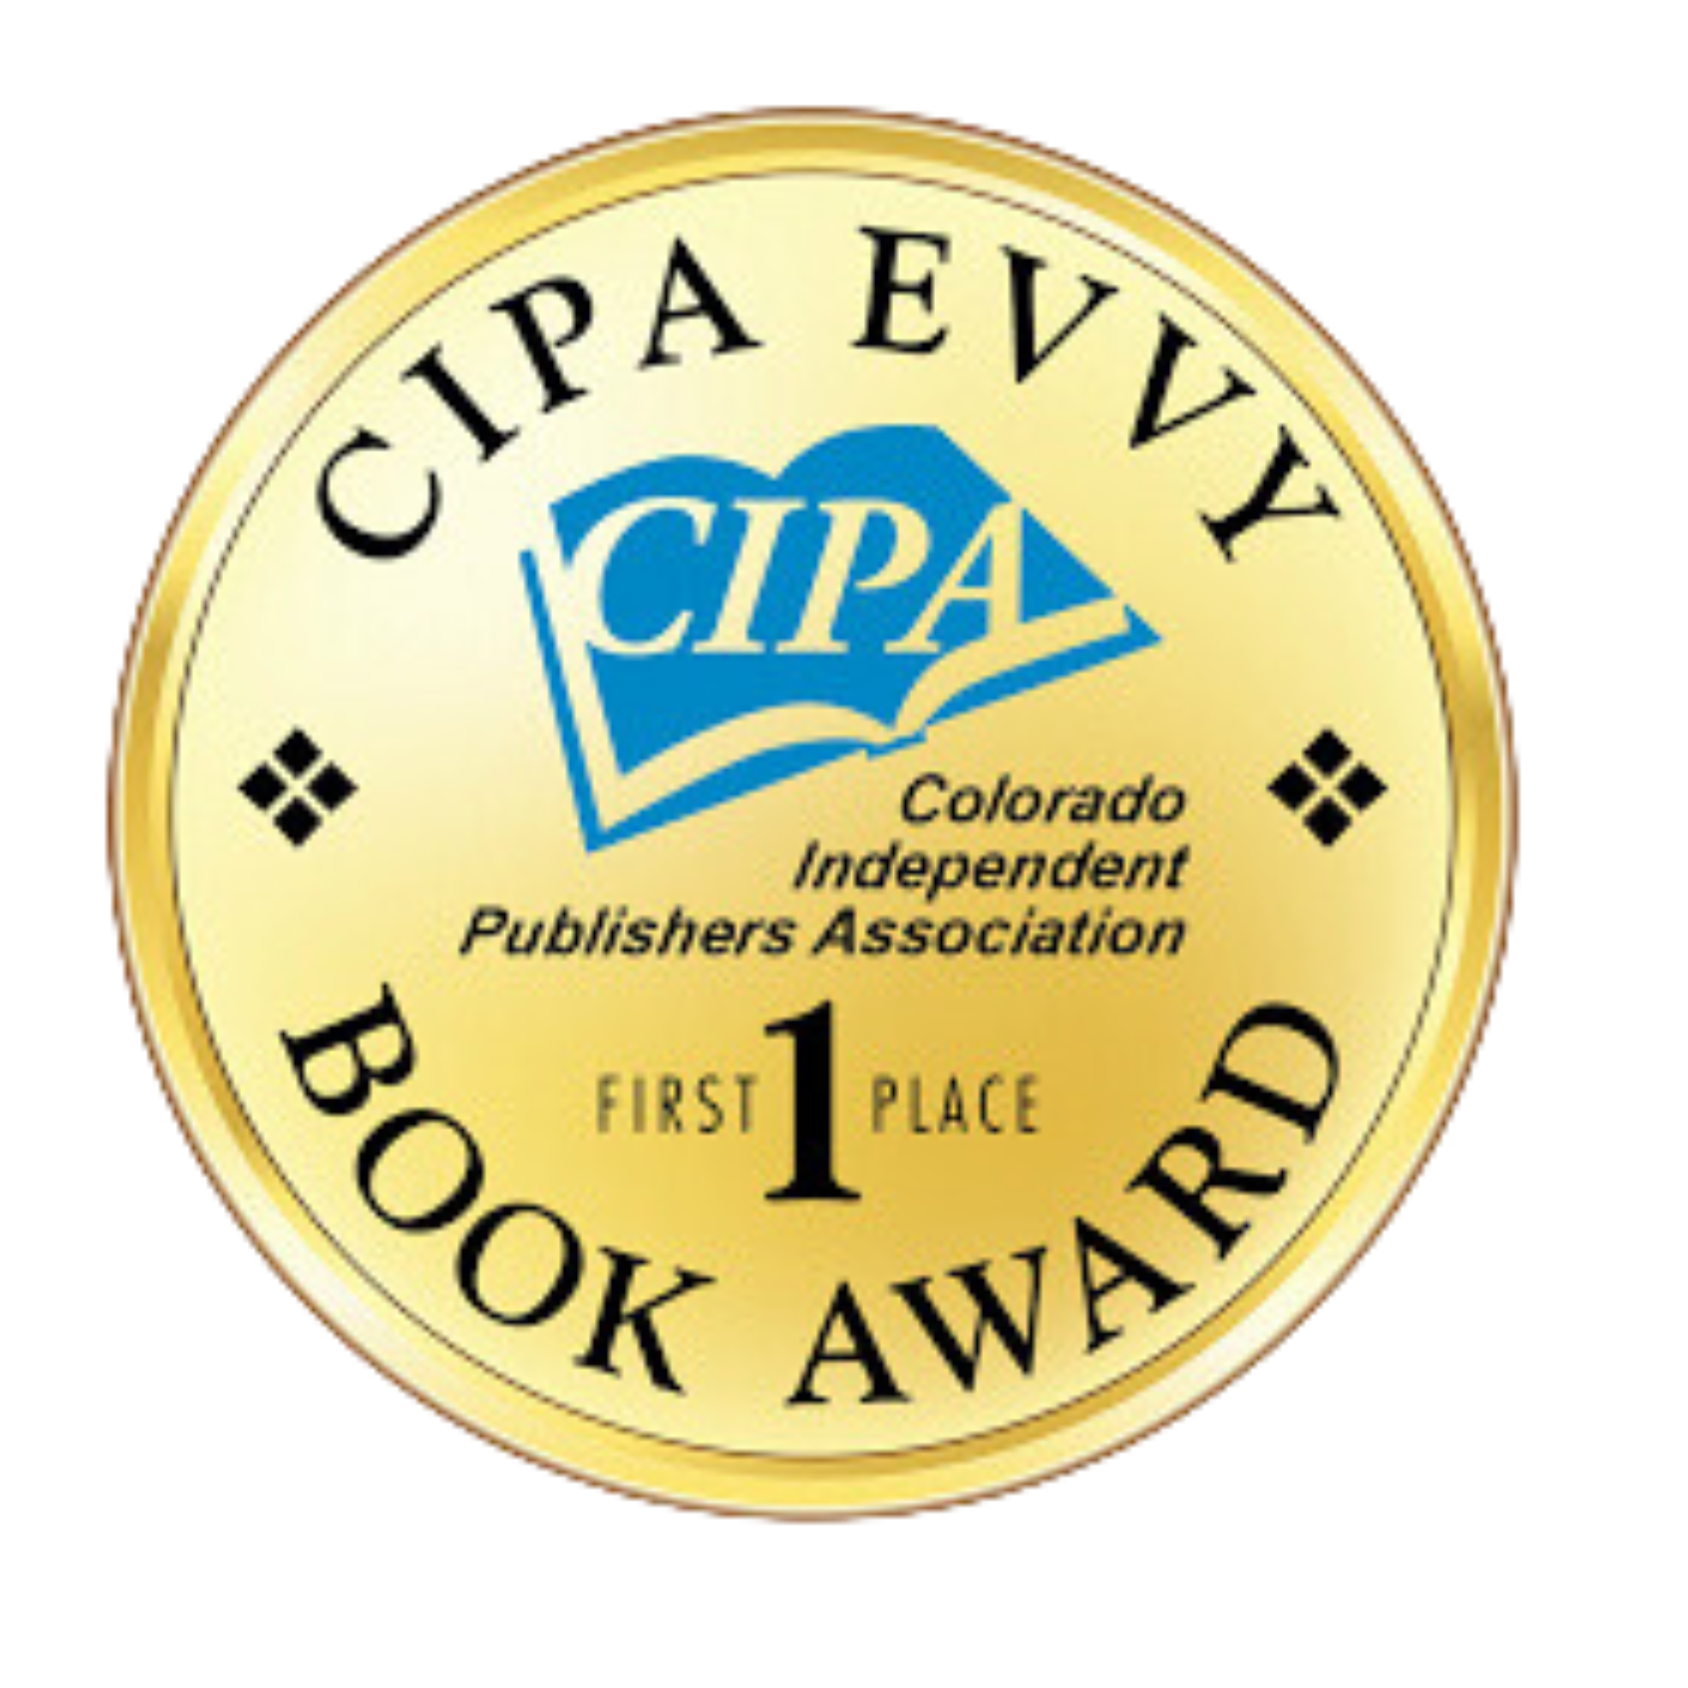 A gold-colored medallion representing the "cipa evvy book award" for first place in the children's book about disabilities category by the colorado independent publishers association.